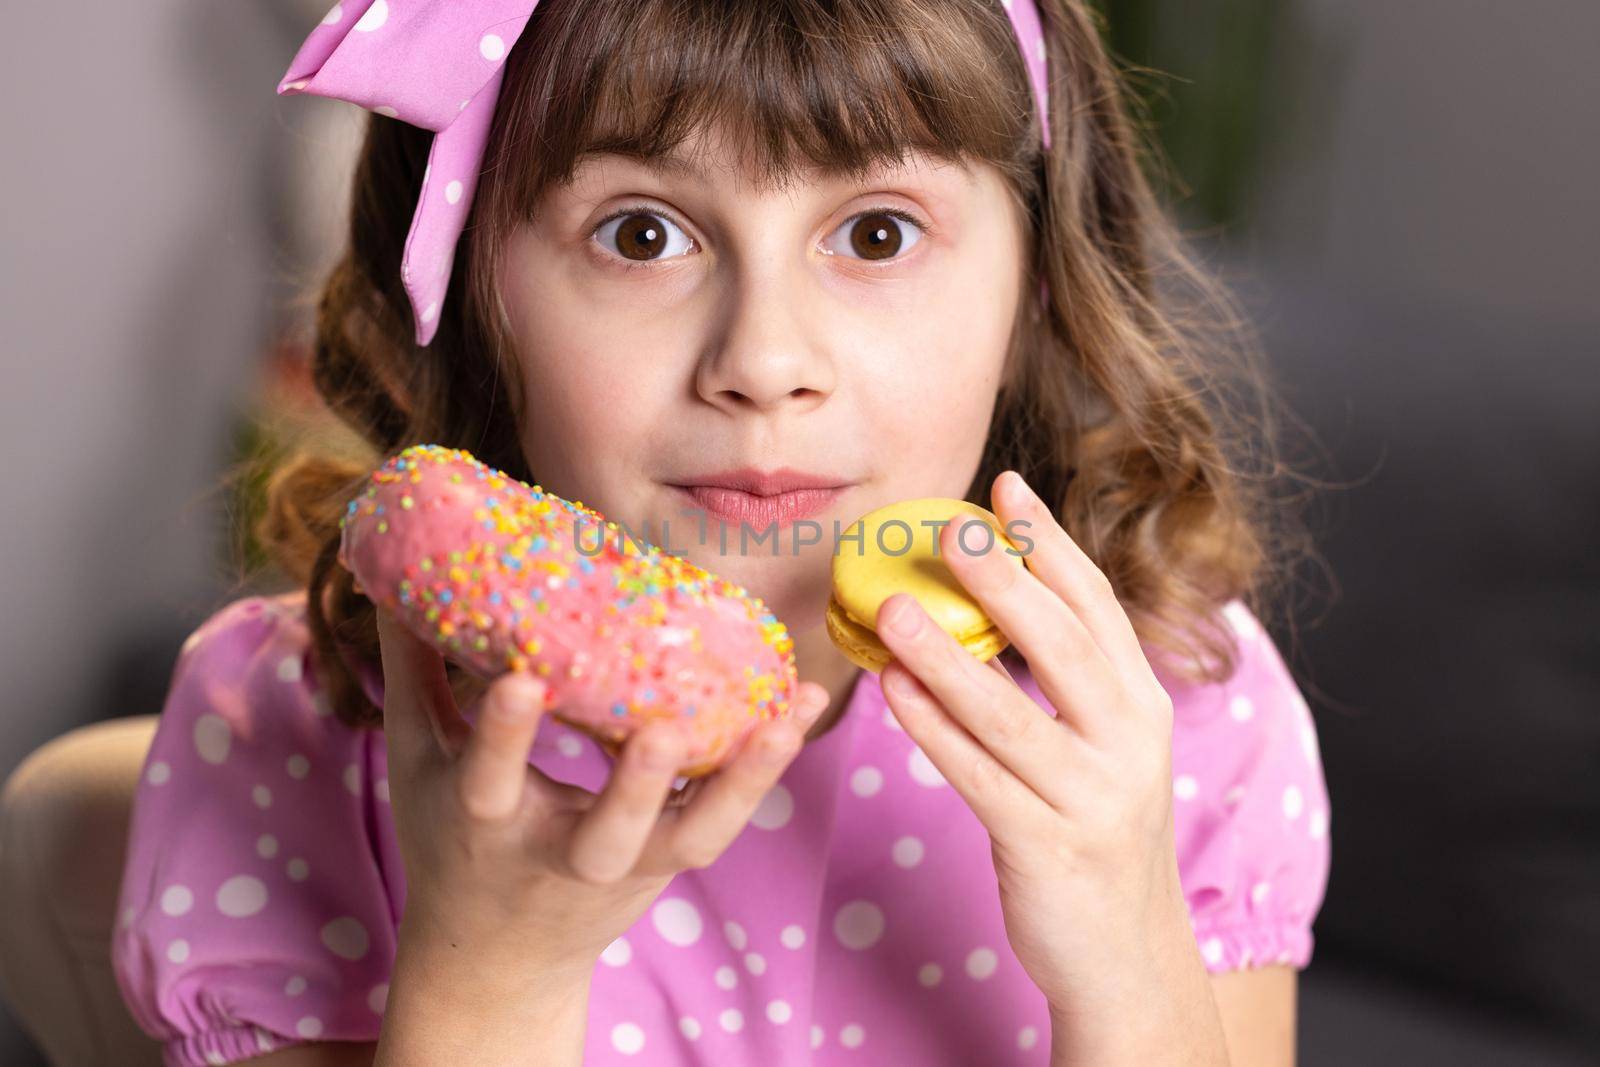 Cute little girl in pink dress holding macaron and donut in hands by the face. Funny concept with sweets. Adolescent school girl plays with sweet donuts doing happy fun face expressions on background.